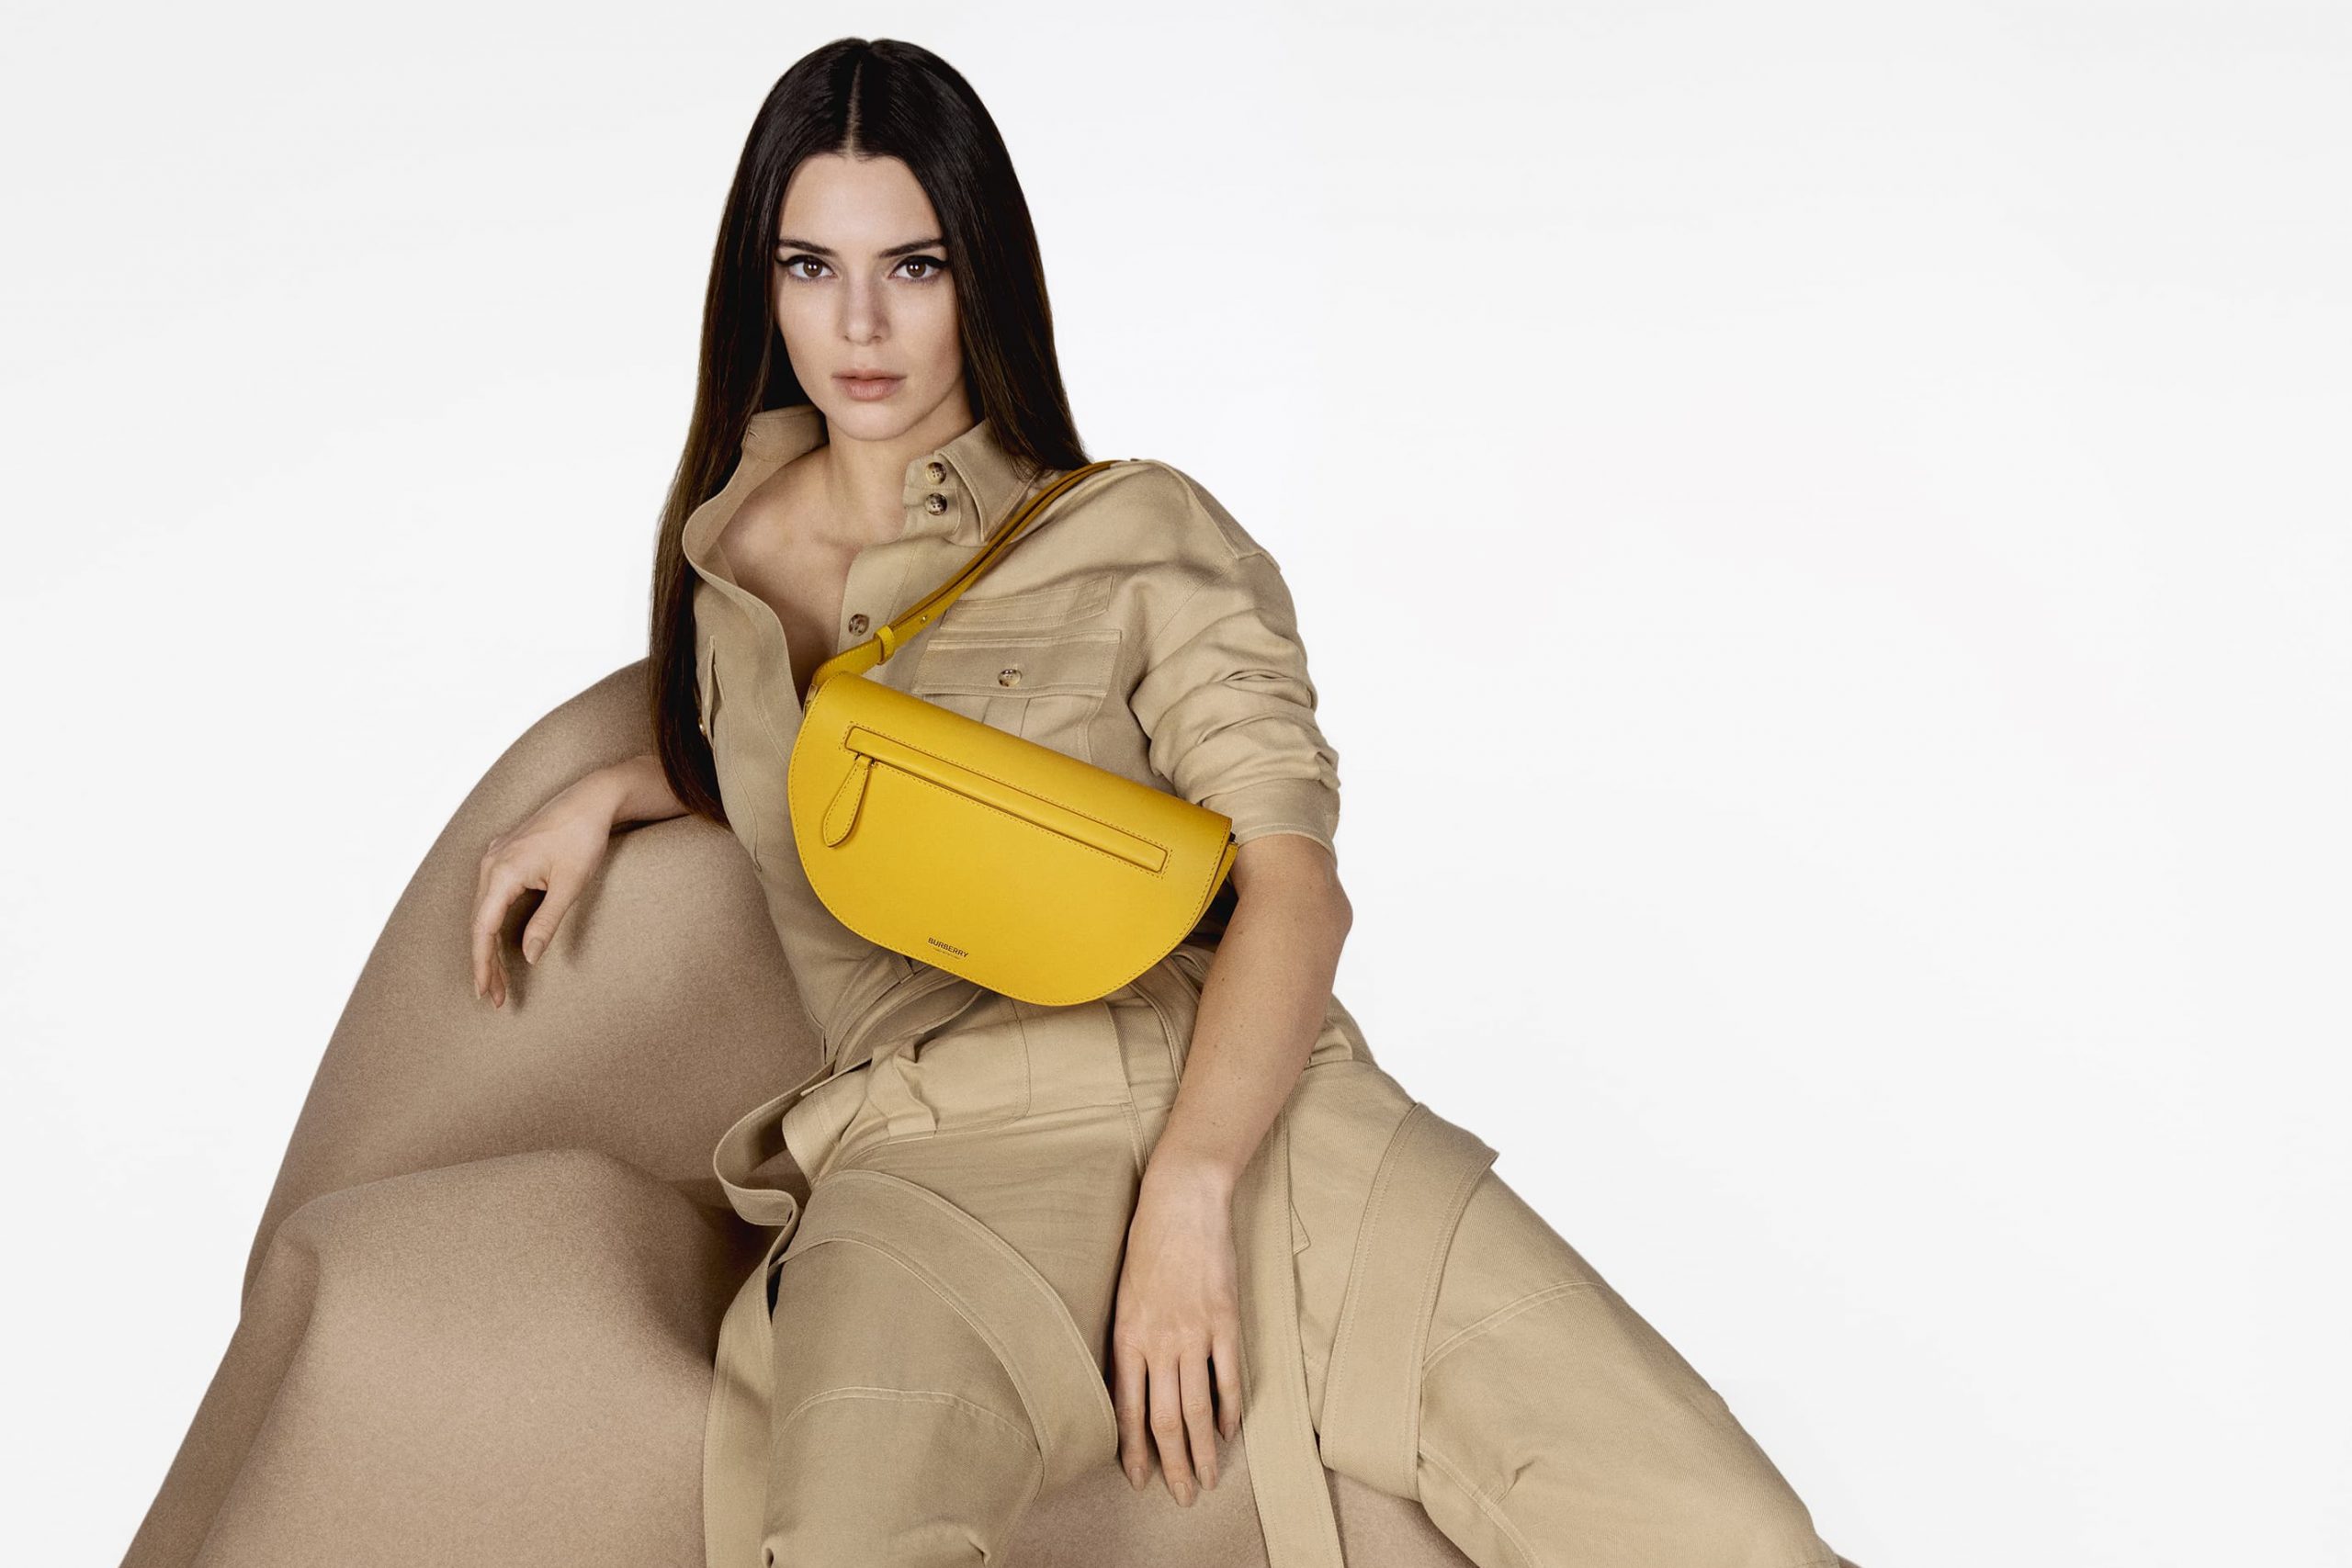 Burberry's New Olympia Bag Campaign Features Kendall Jenner, FKA